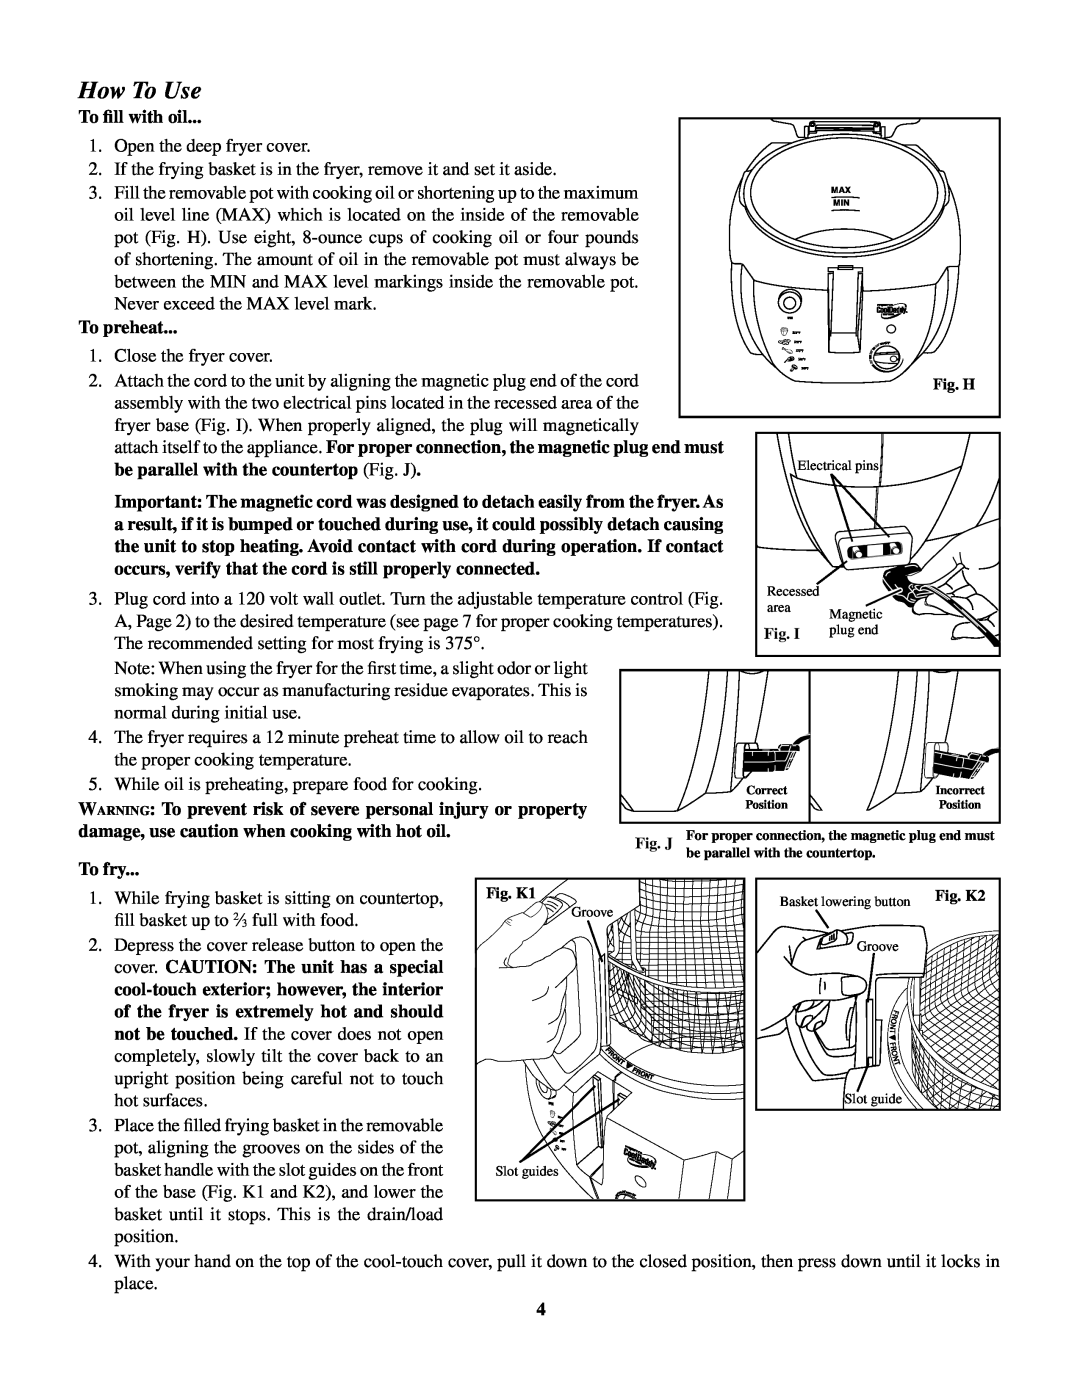 Presto CoolDaddy manual How To Use, To fill with oil, To preheat, be parallel with the countertop Fig. J, To fry 